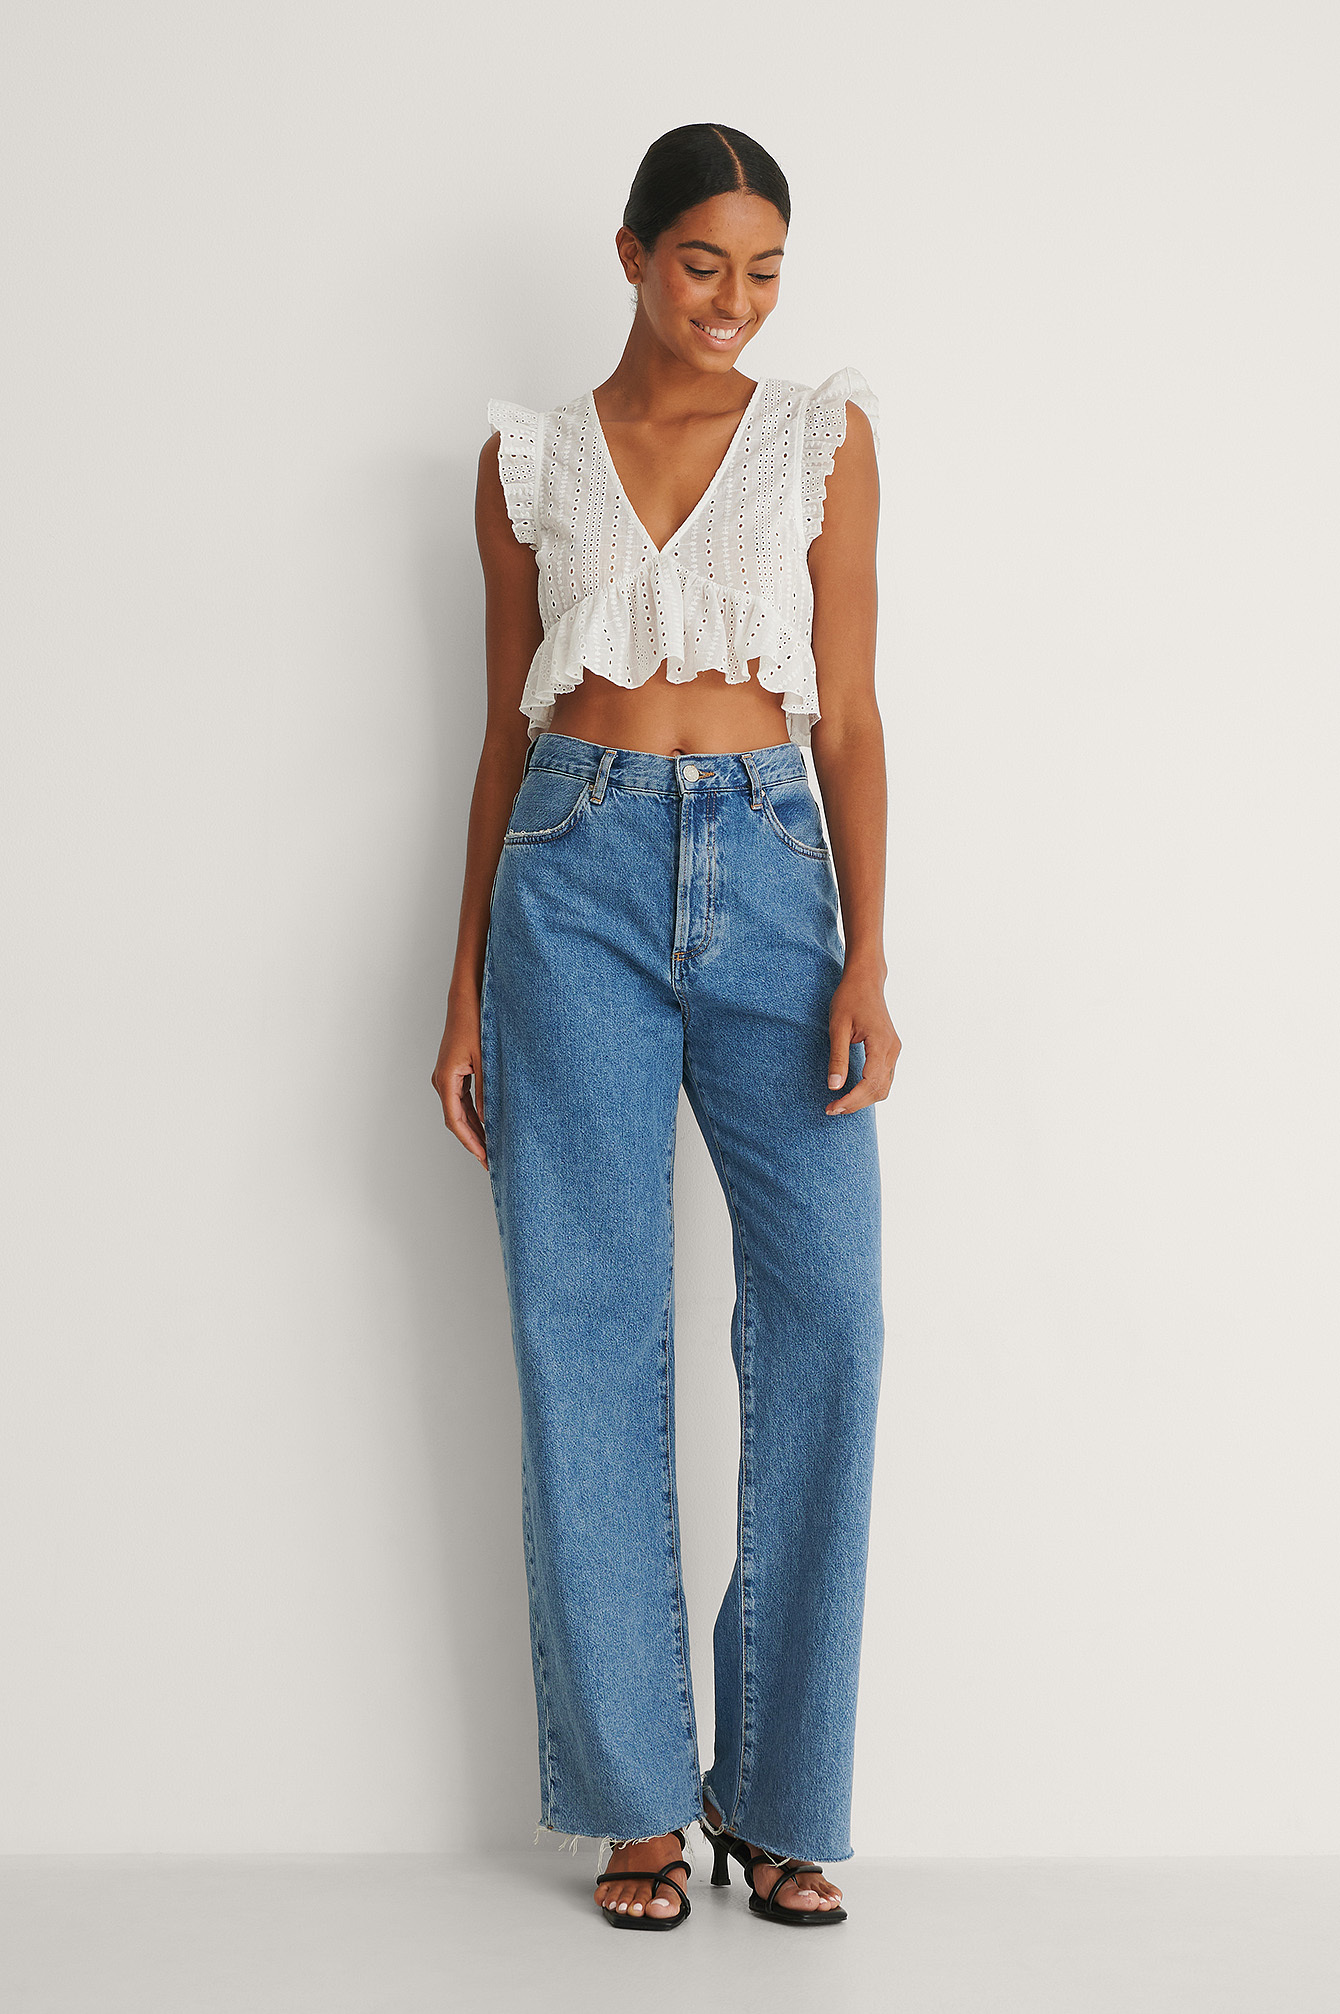 V-neck Anglaise Cropped Top Outfit